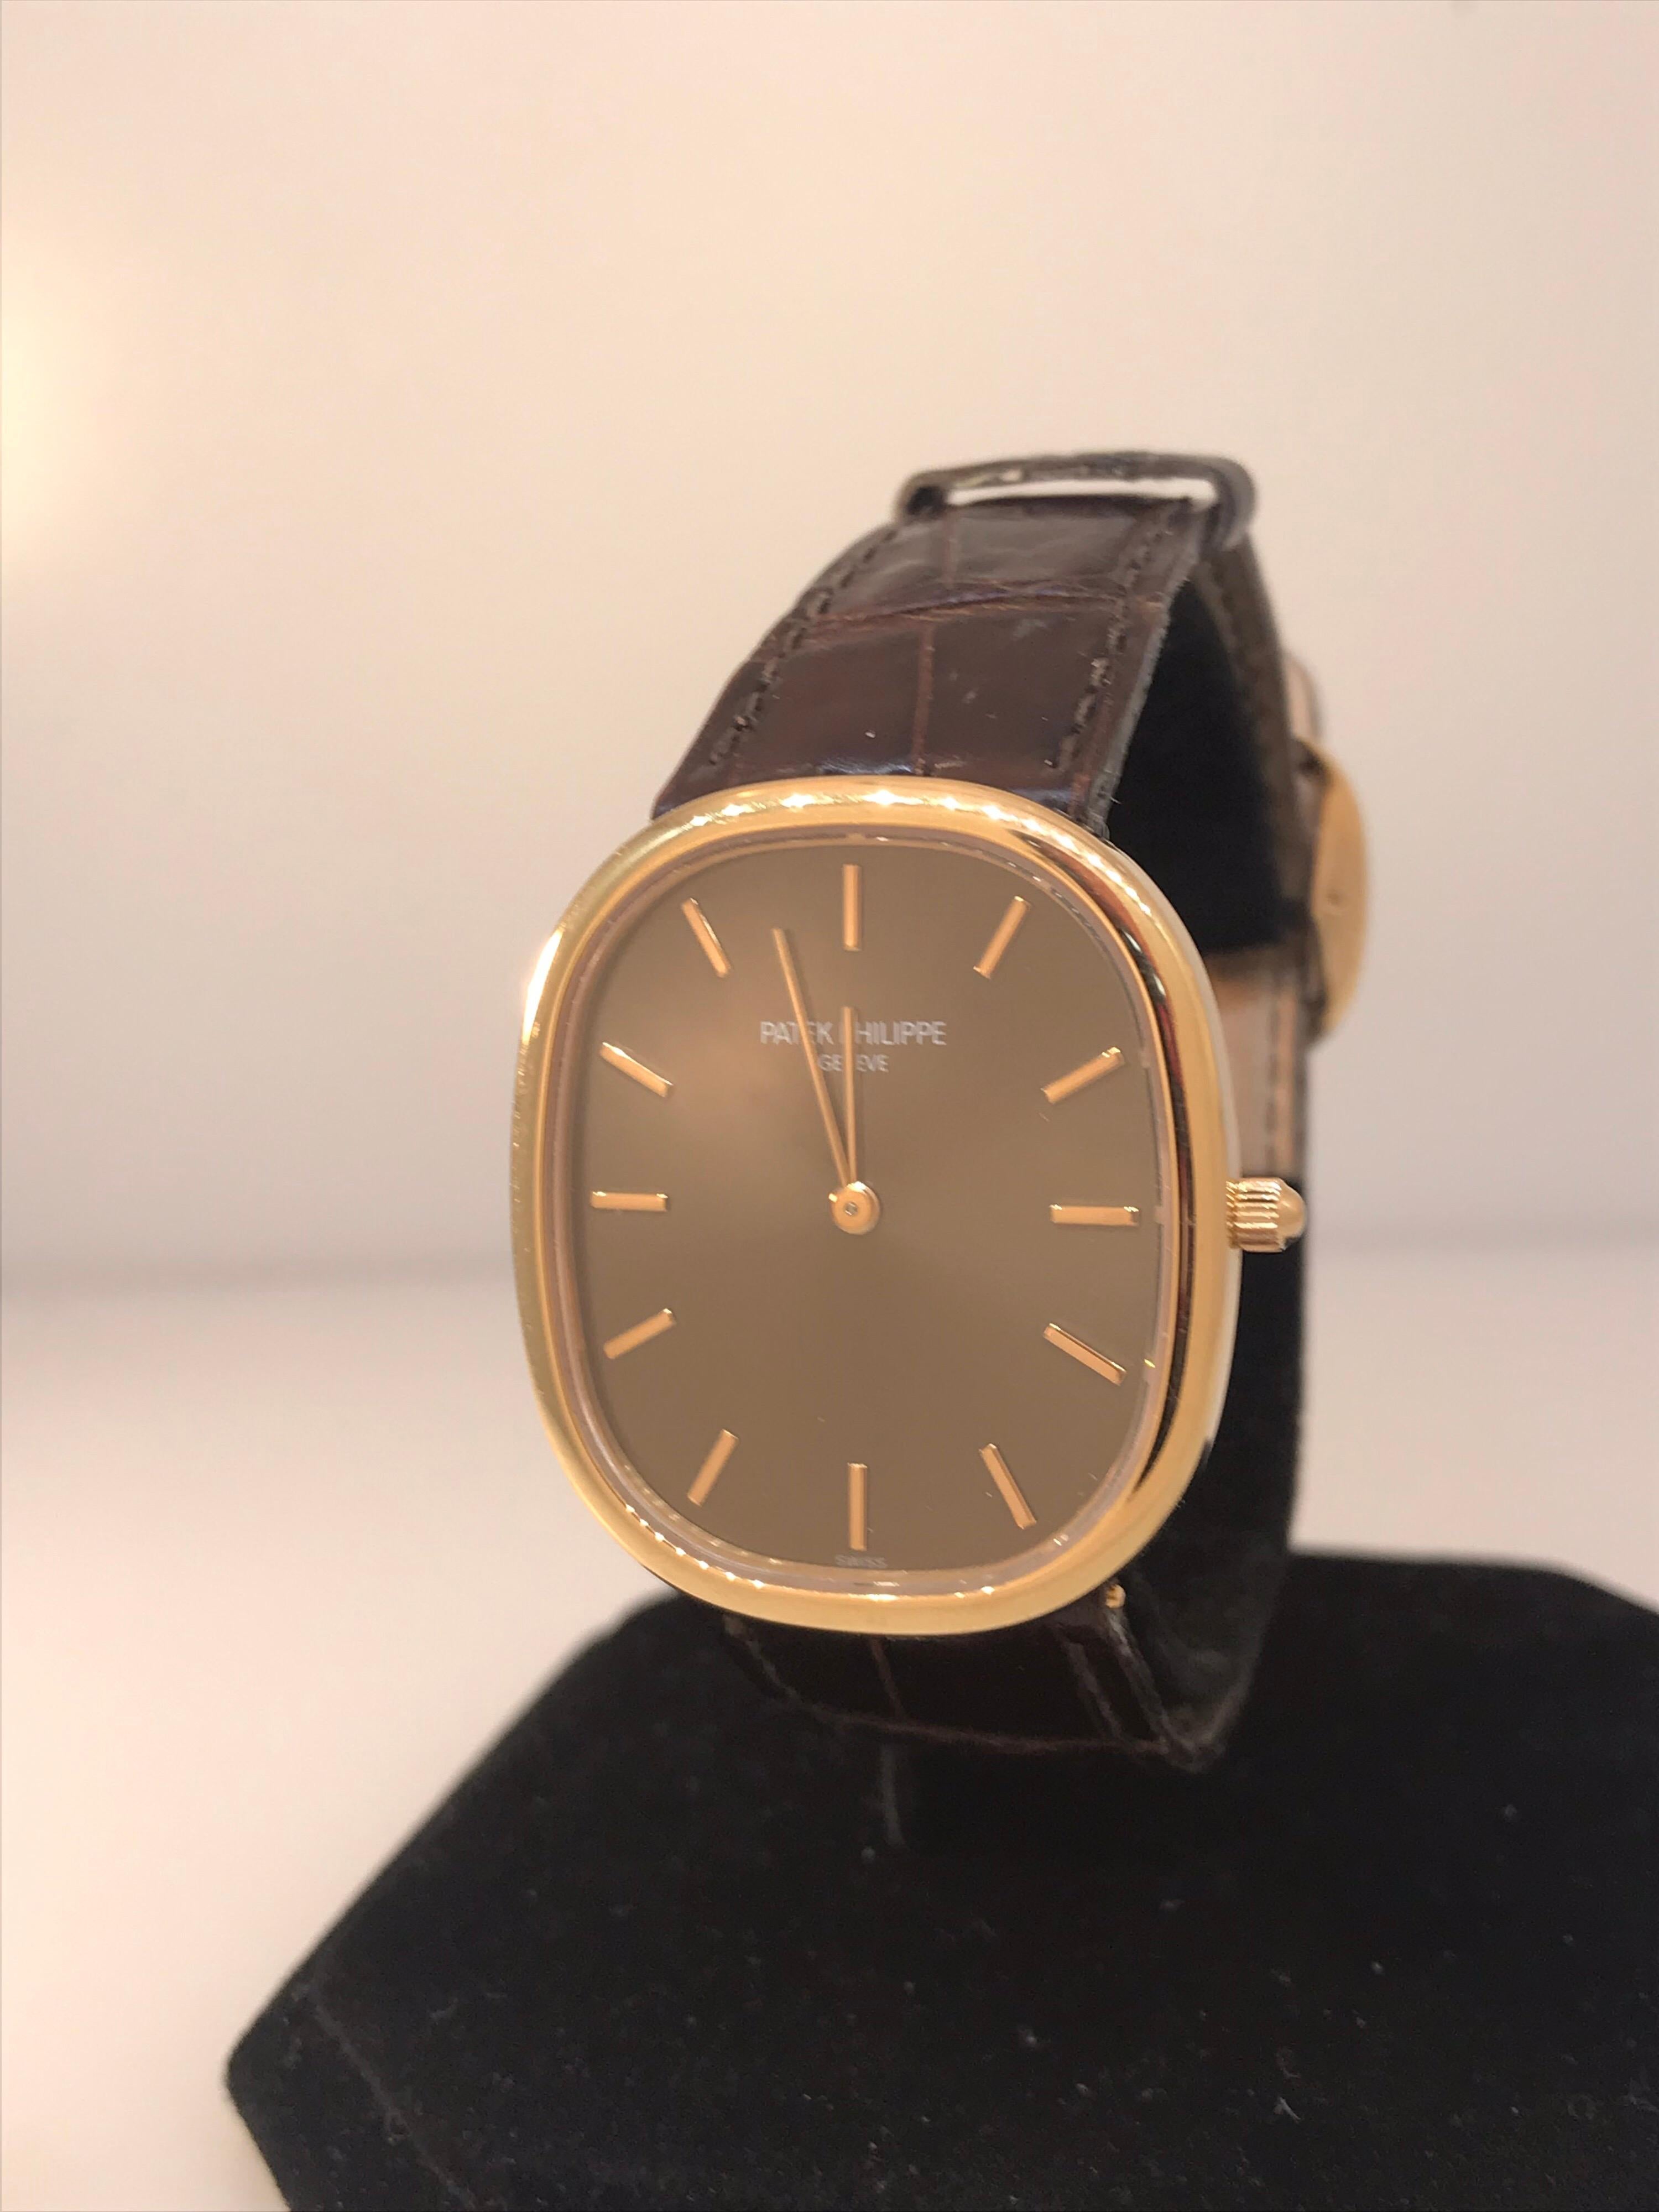 Patek Philippe Ellipse Men's Watch

Model Number: 3738/100R

100% Authentic

Preowned

Comes with original Patek Philippe Warranty

Case is in excellent condition. Strap is worn

18 Karat Rose Gold Case & Buckle

Brown Dial

Case Dimensions: 31.1mm